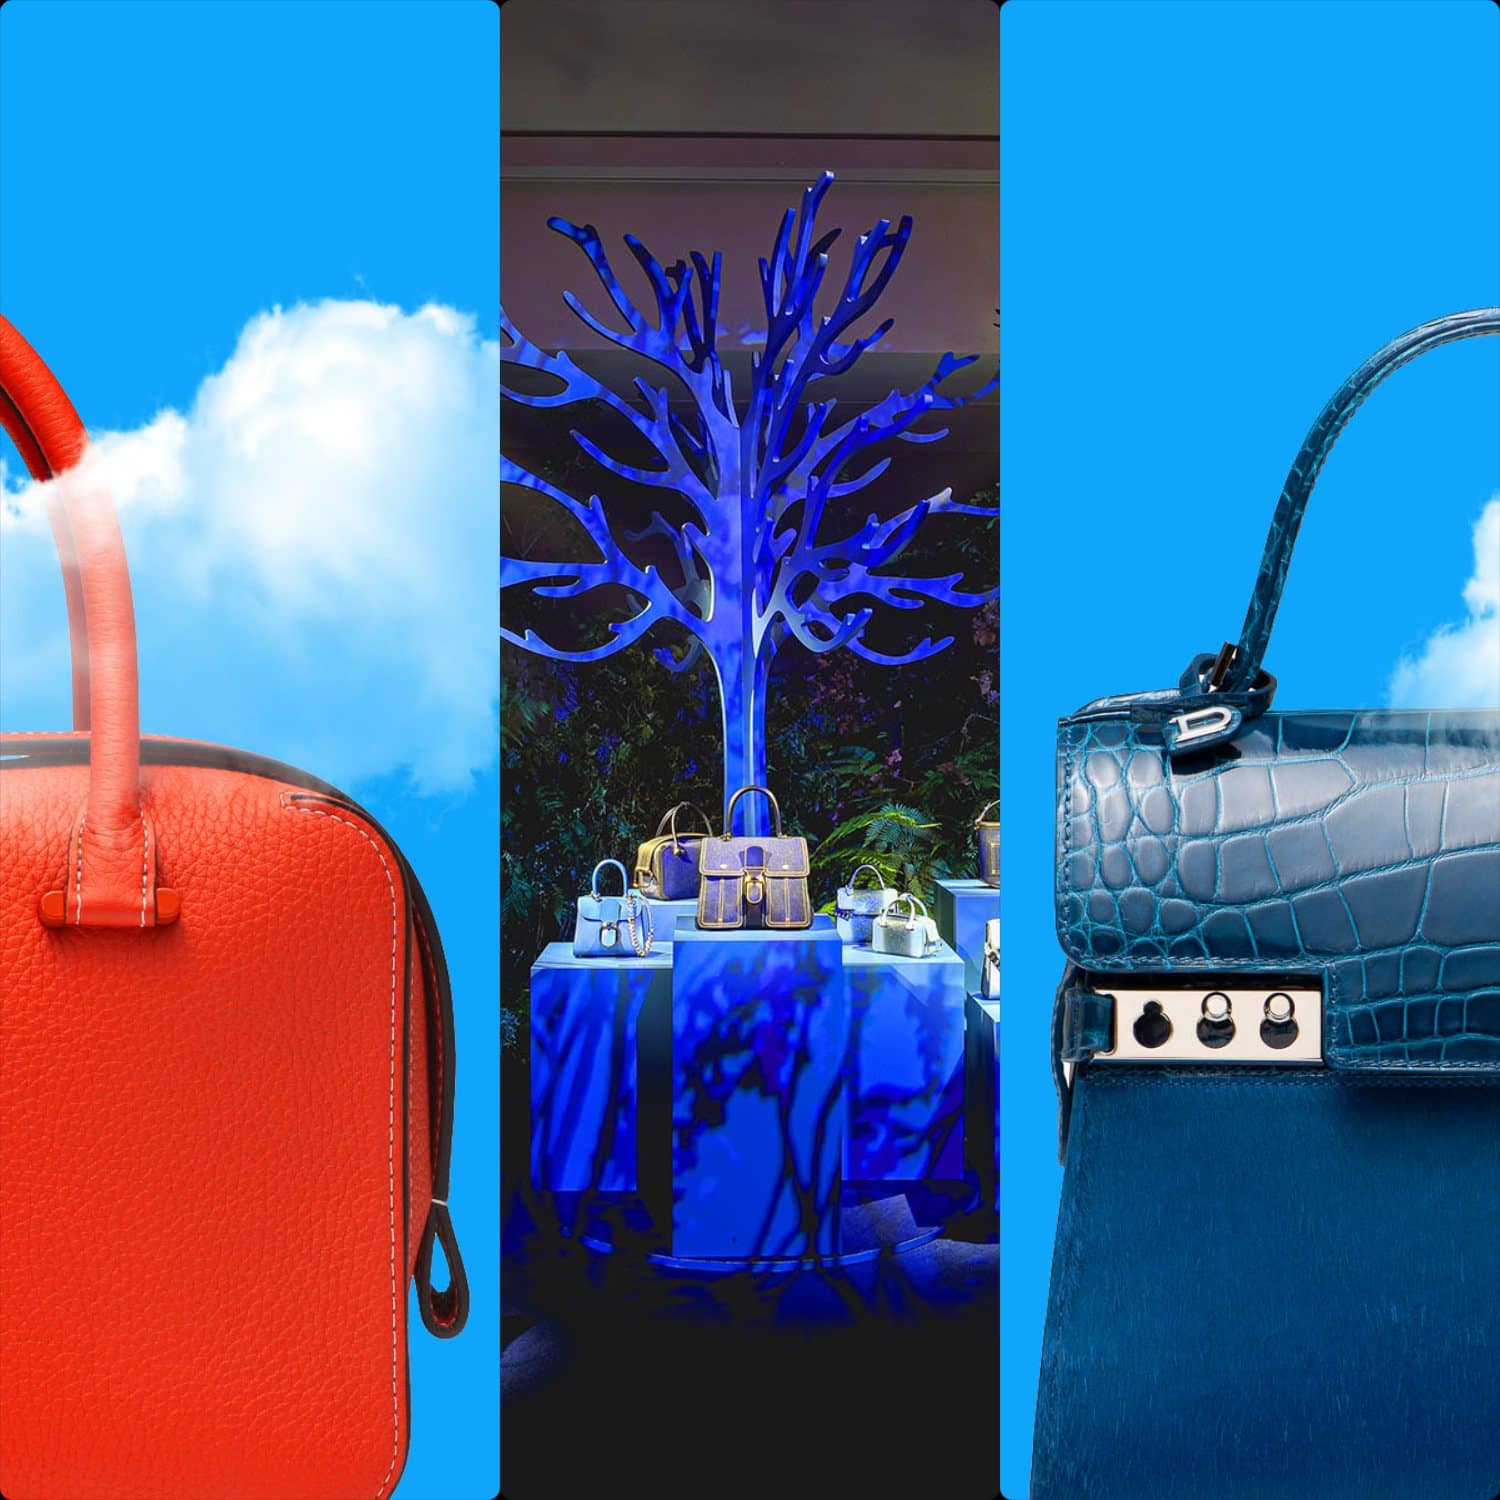 DELVAUX FALL-WINTER 2015 COLLECTION